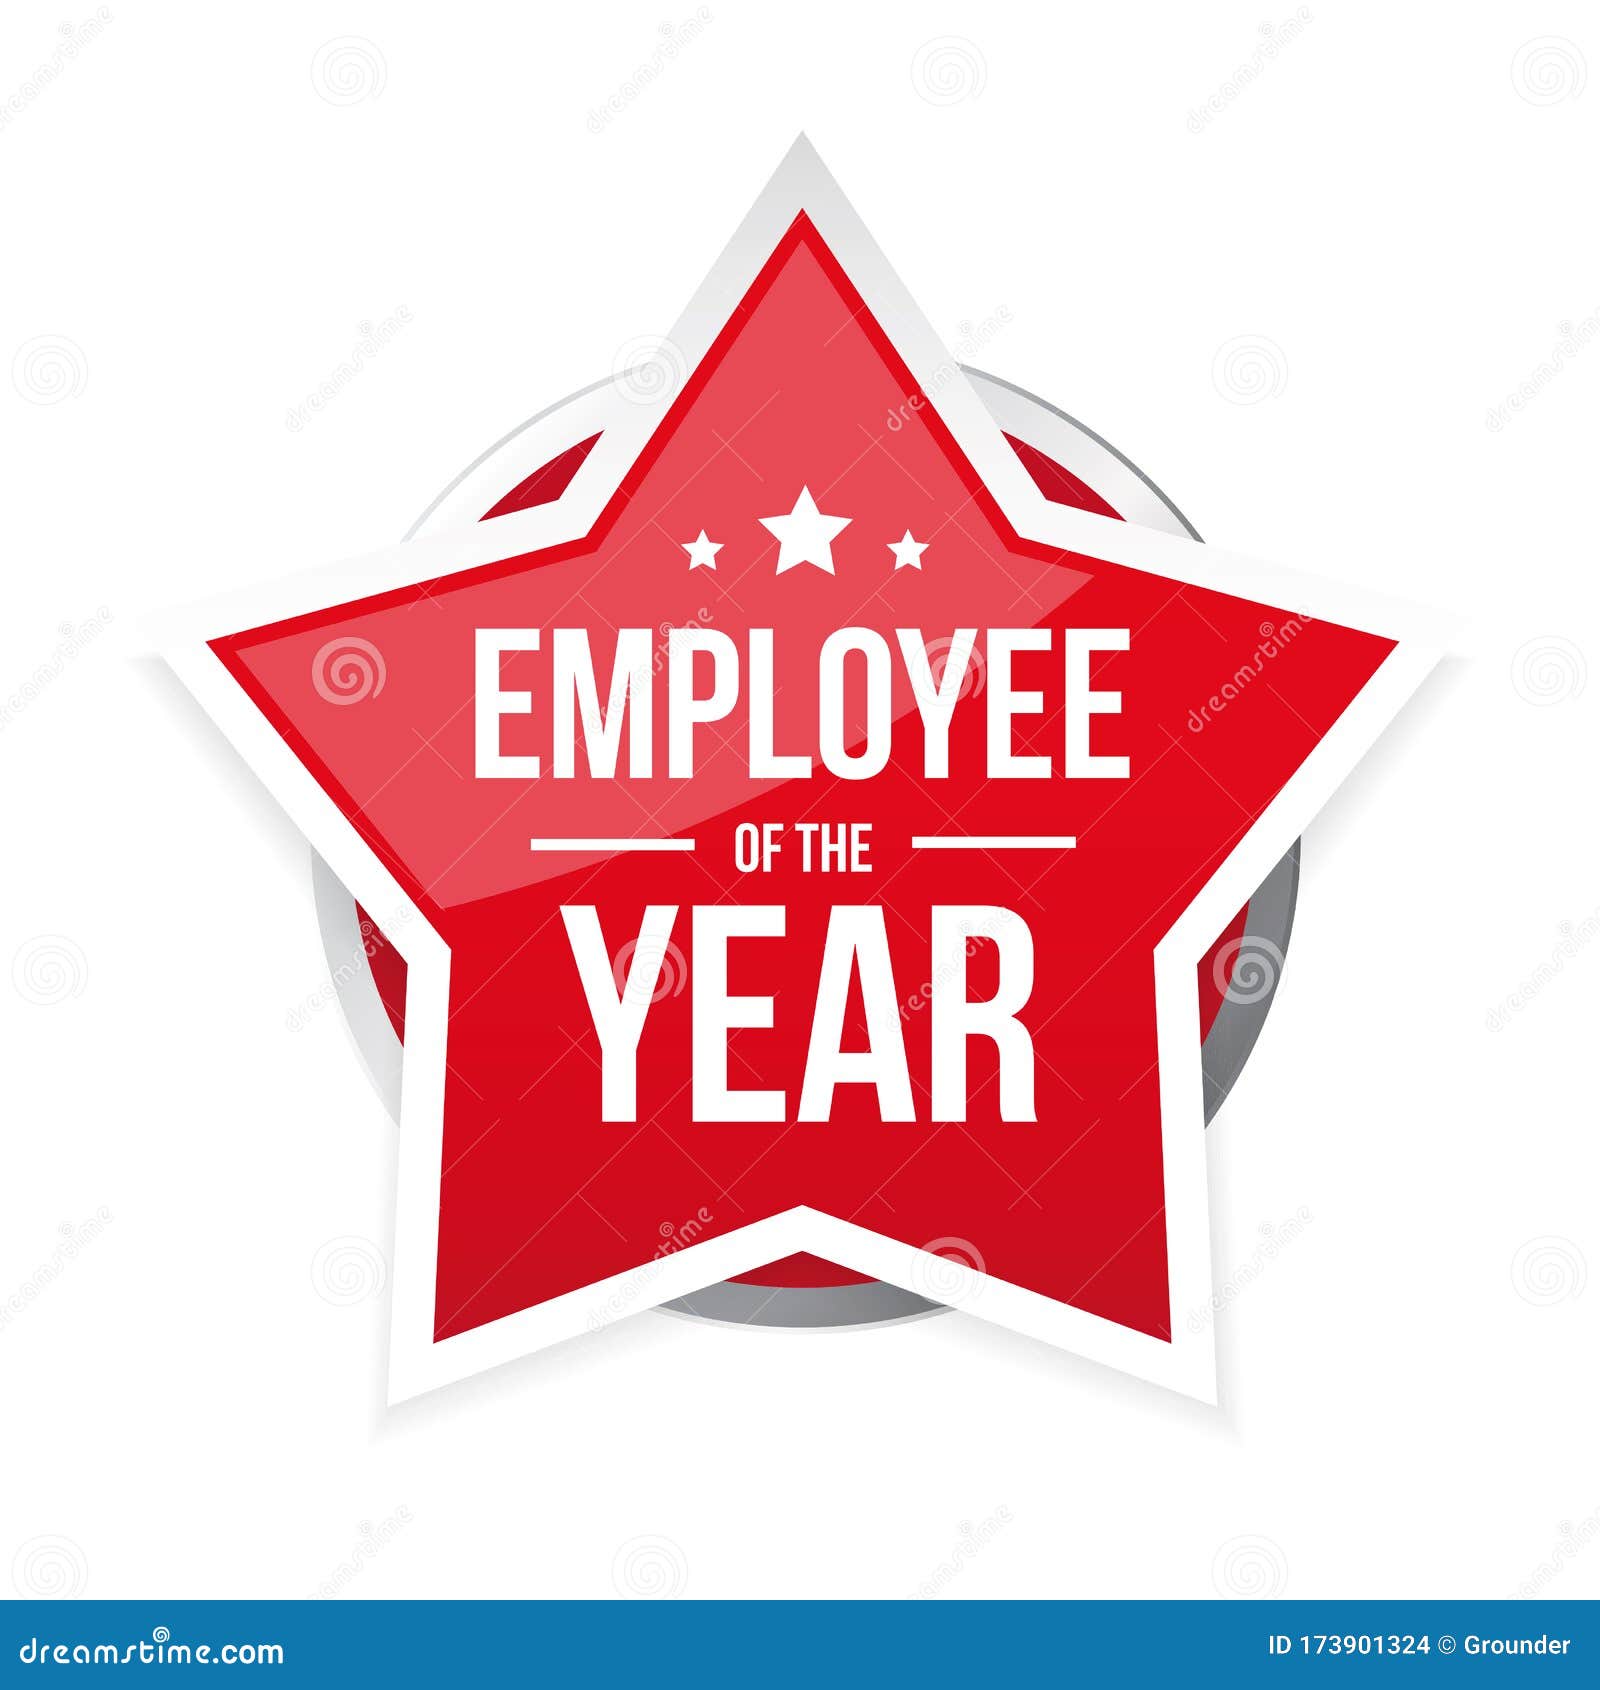 Best Employee of the Year Award Badge Stock Vector - Illustration of